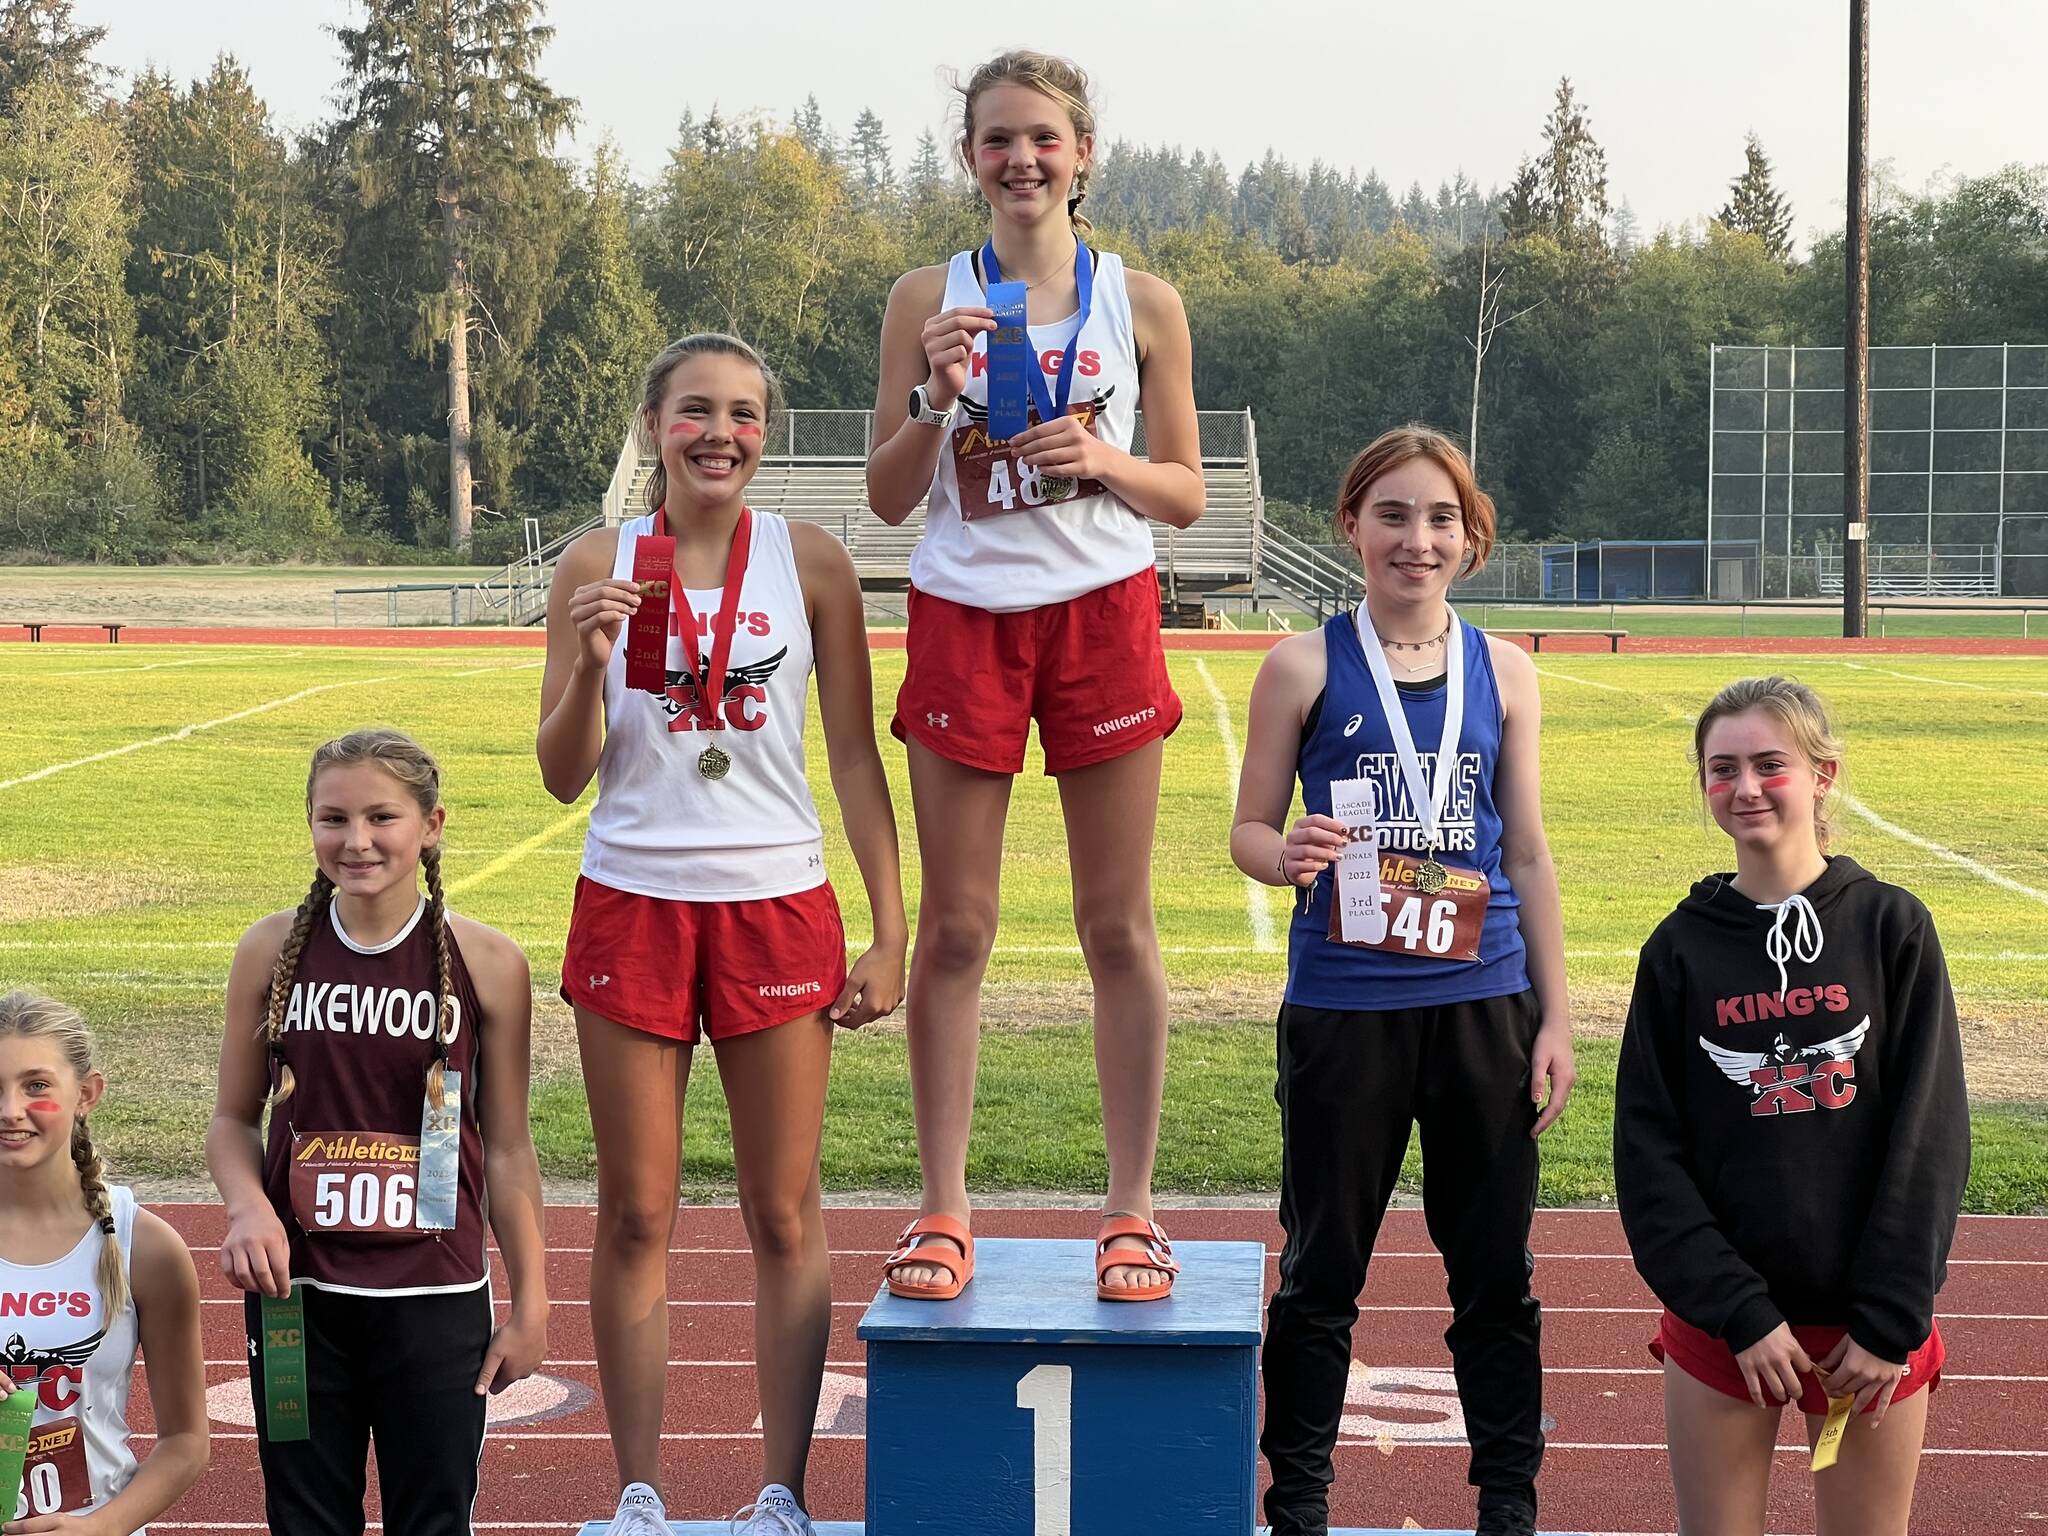 Photo provided
Reed Atwood (second from right) placed 3rd at the Cascade League Championship held at South Whidbey High School with a time of 12 minutes, 2 seconds.